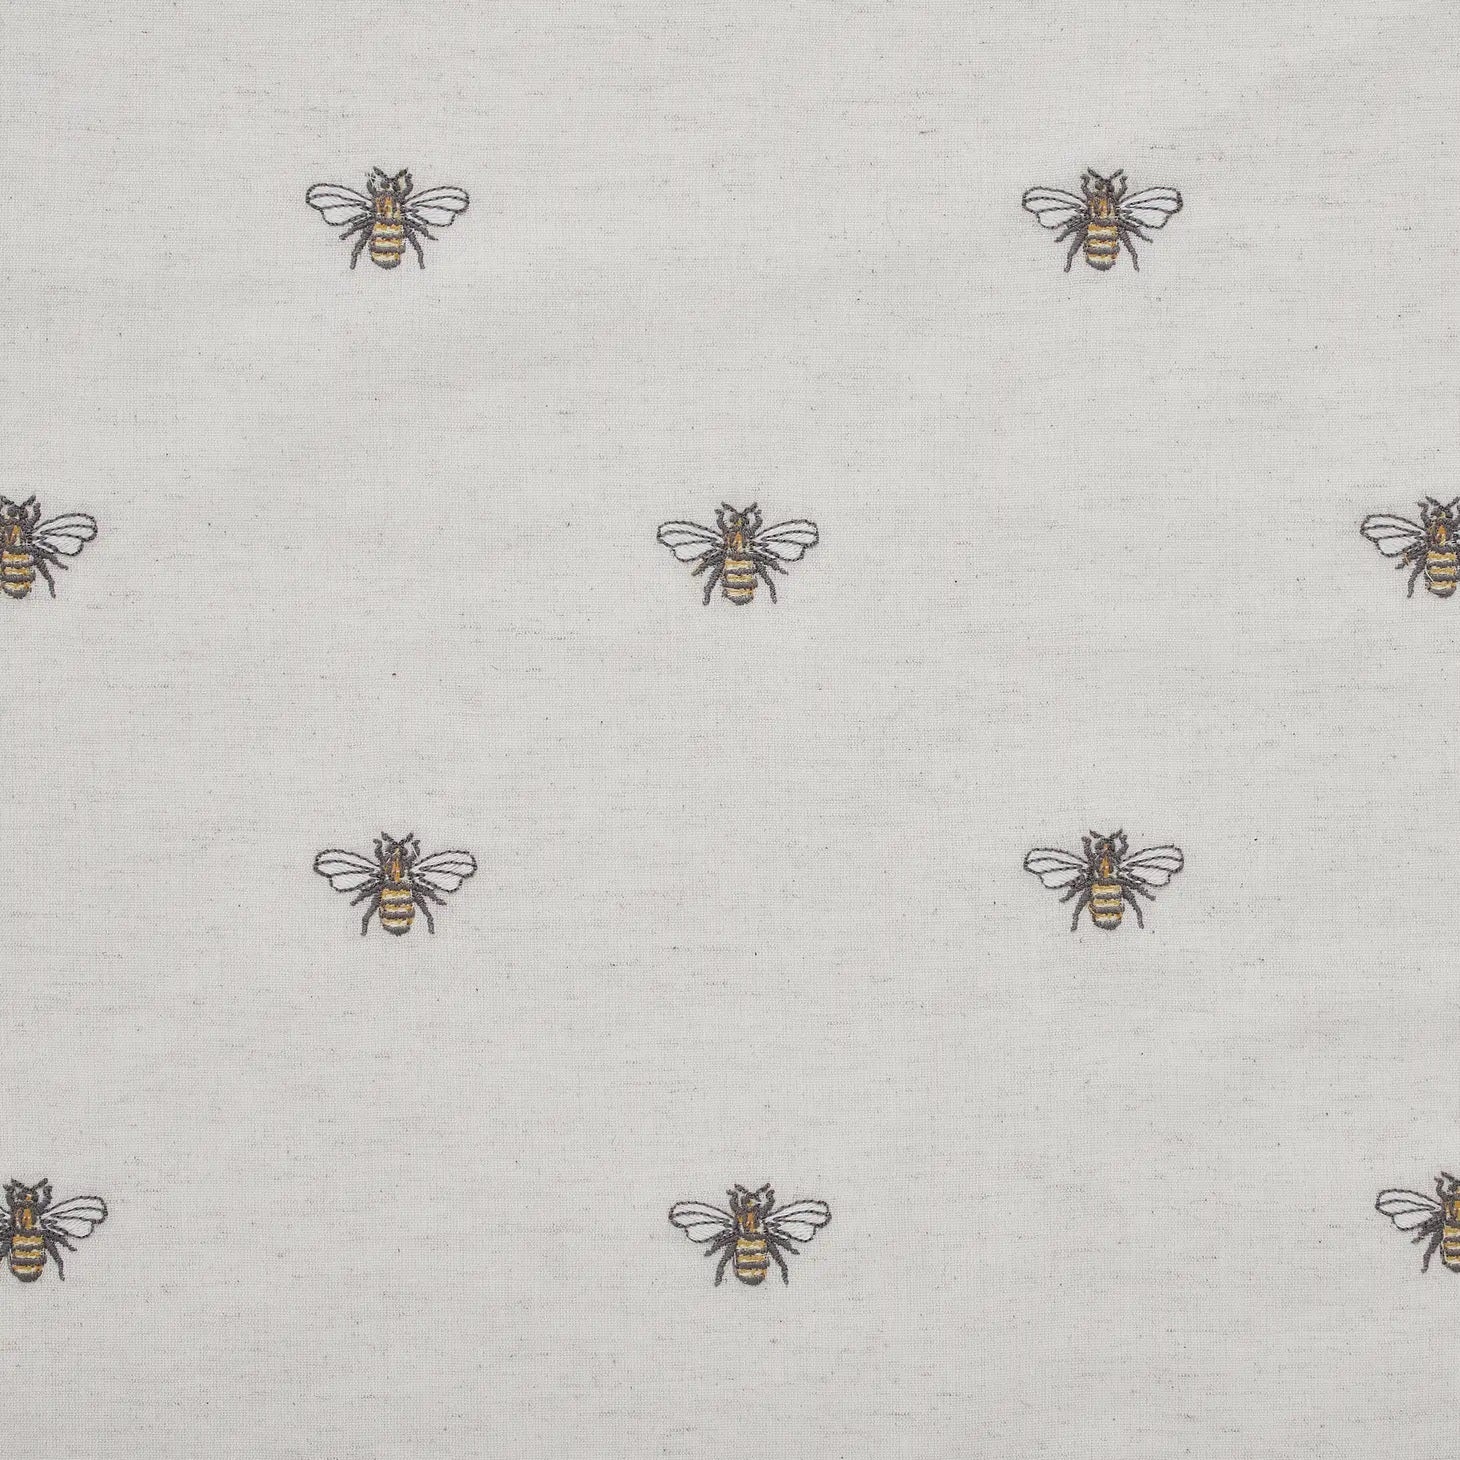 Embroidered Bee Runner 13x48 - The Mirrored Past